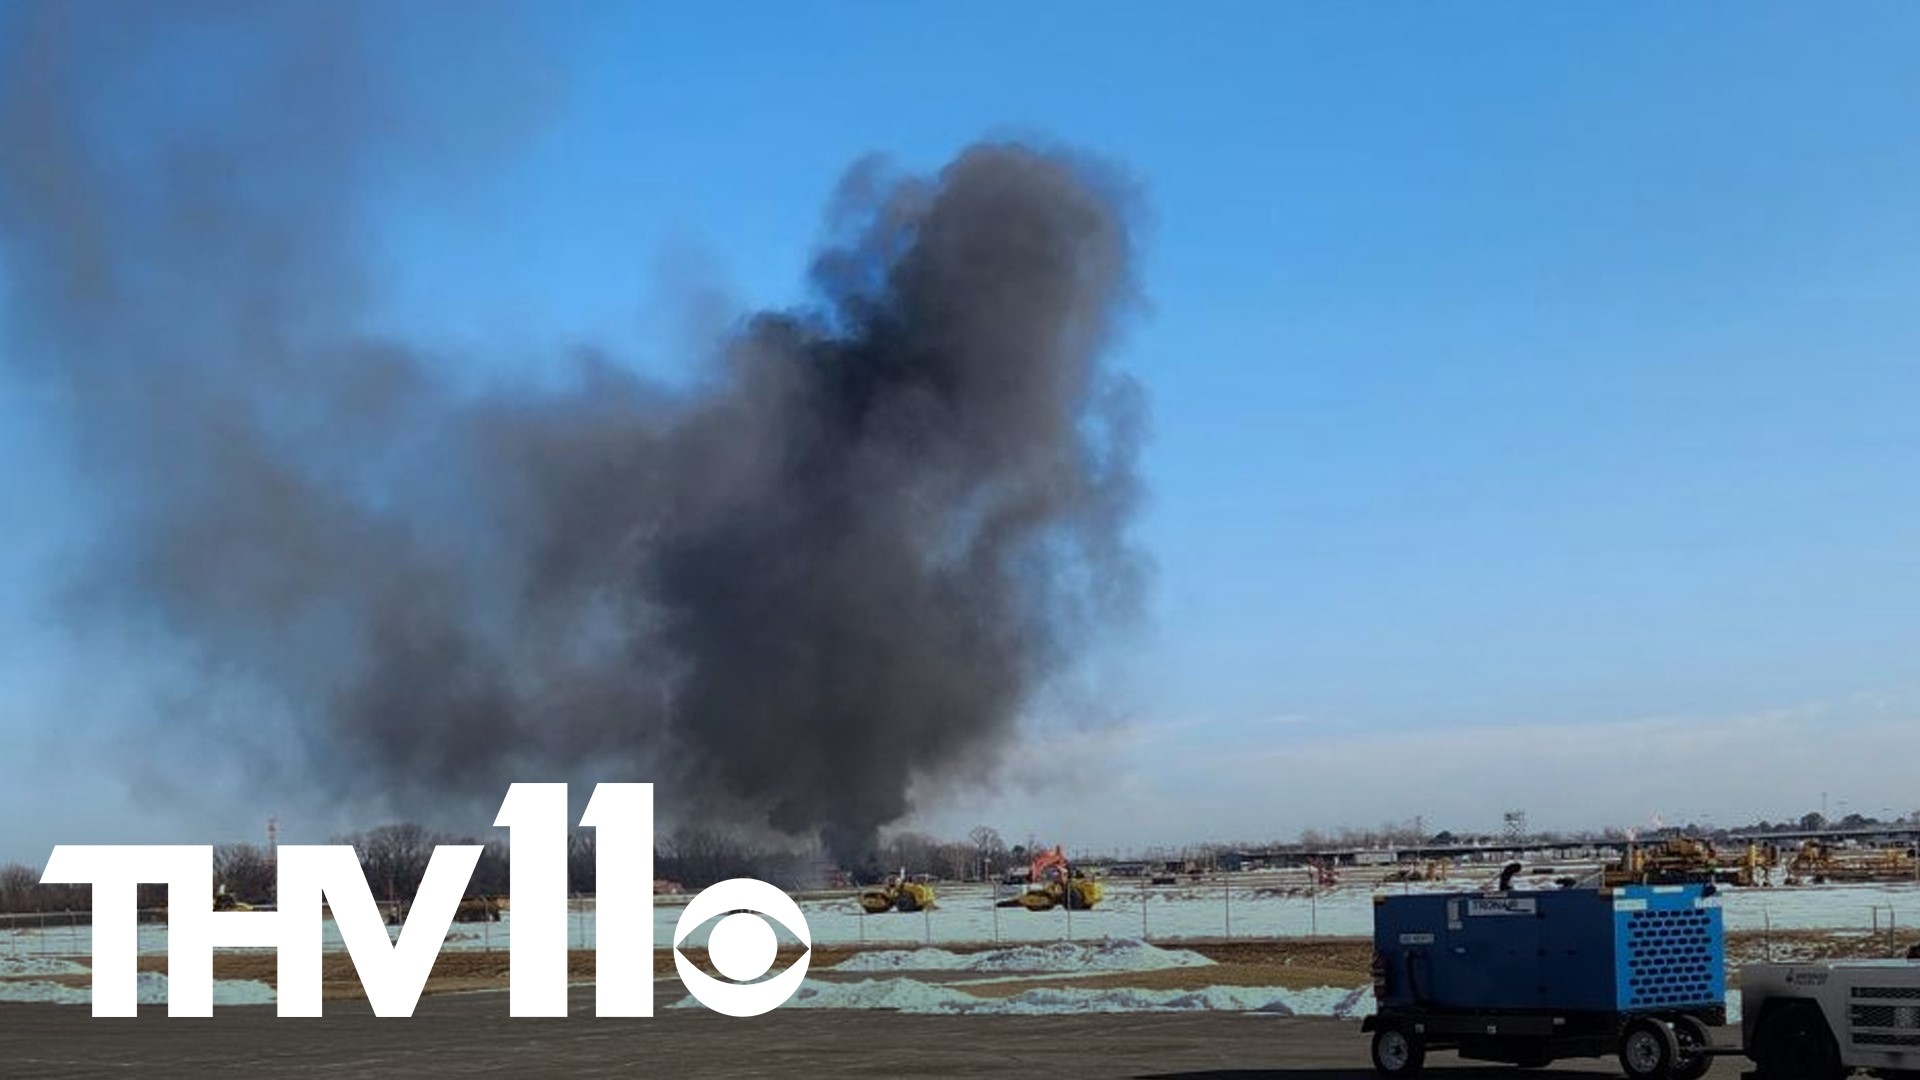 Smoke could be seen in the sky after a small airplane crashed while taking off from the Bill and Hillary Clinton National Airport in Little Rock.